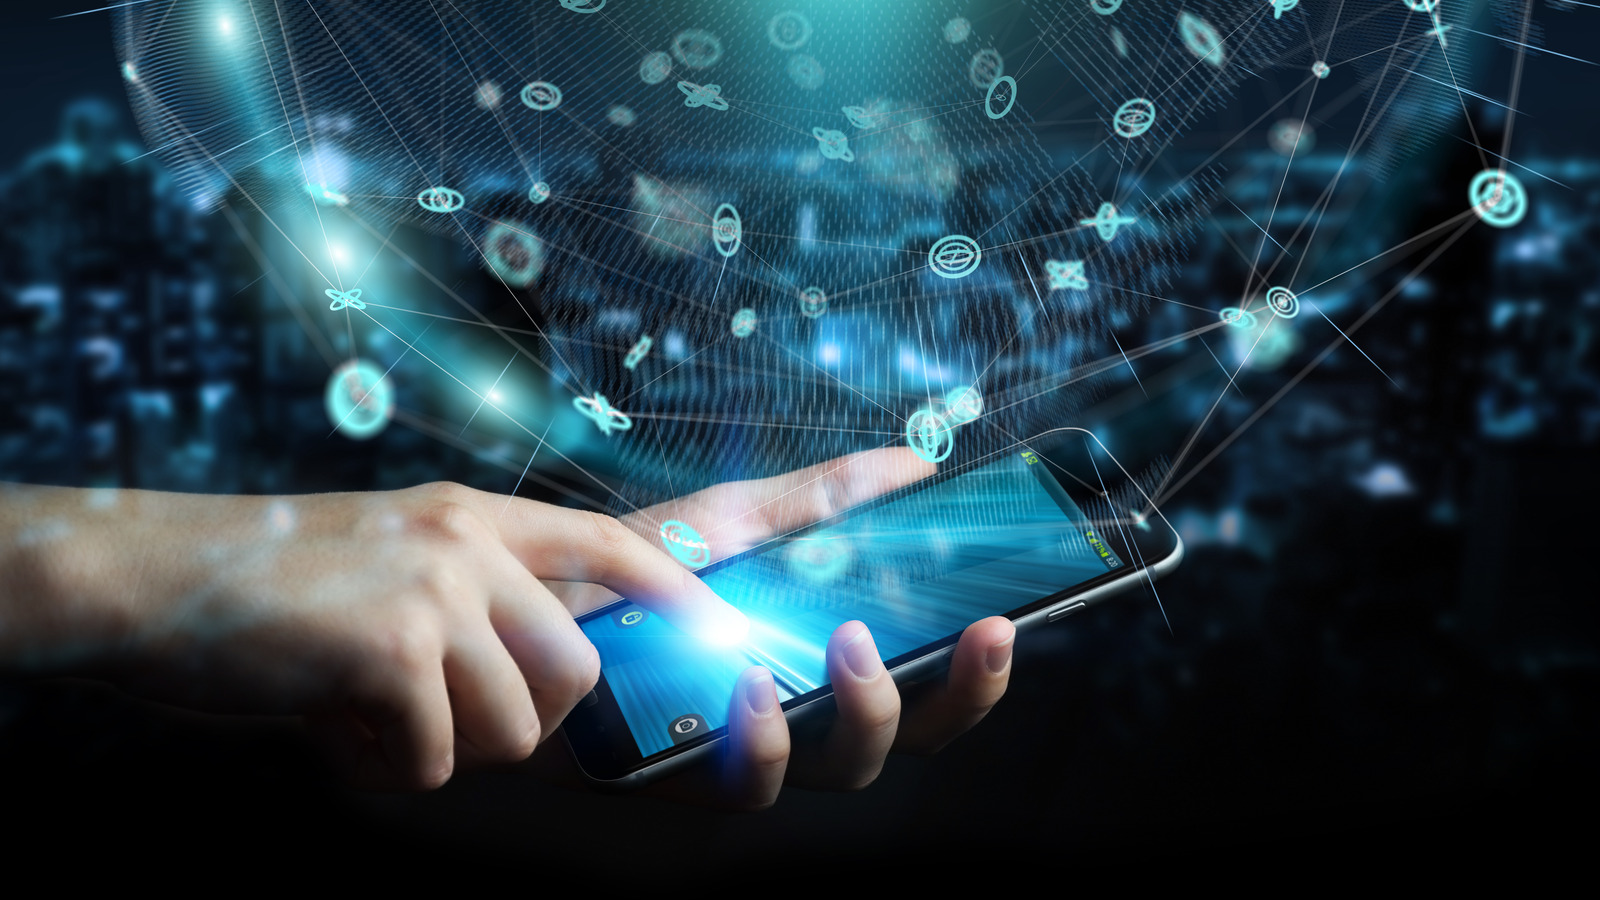 Mobile connectivity: five key trends in mobile connectivity for multinational corporations